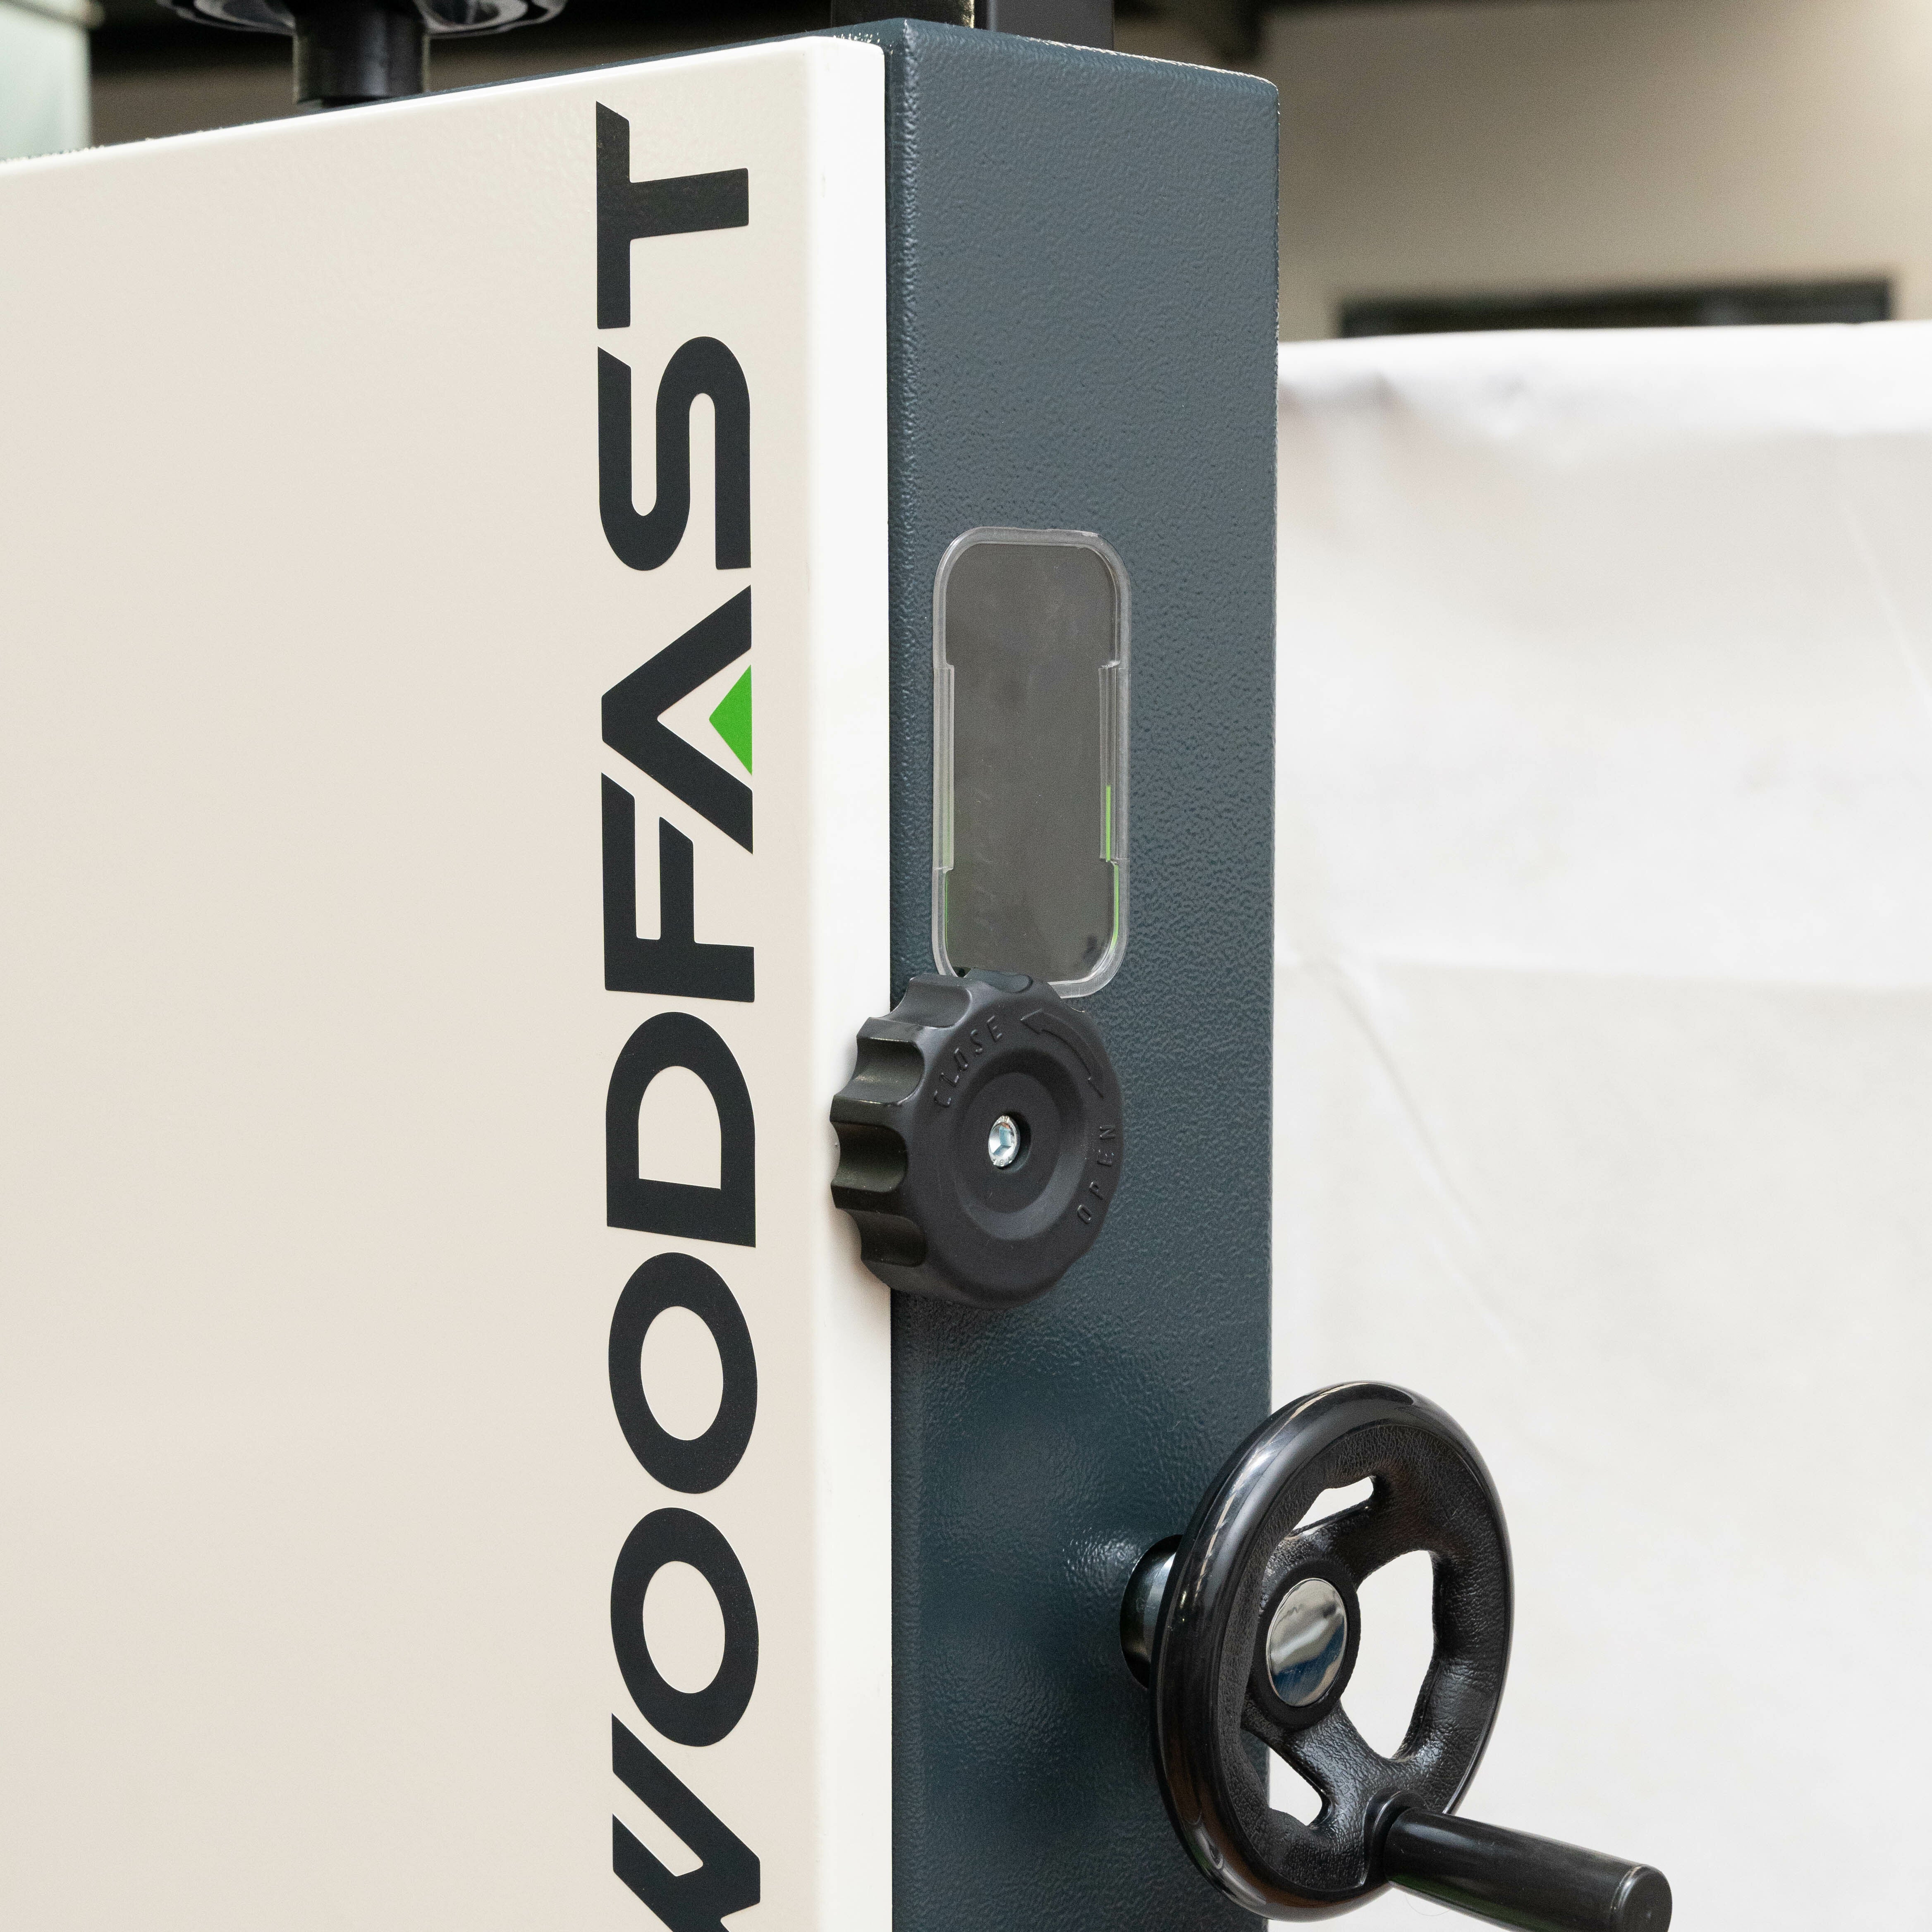 350mm (14") Bandsaw with Open Stand 1.5HP 240V BS350C (BS350X) by Woodfast